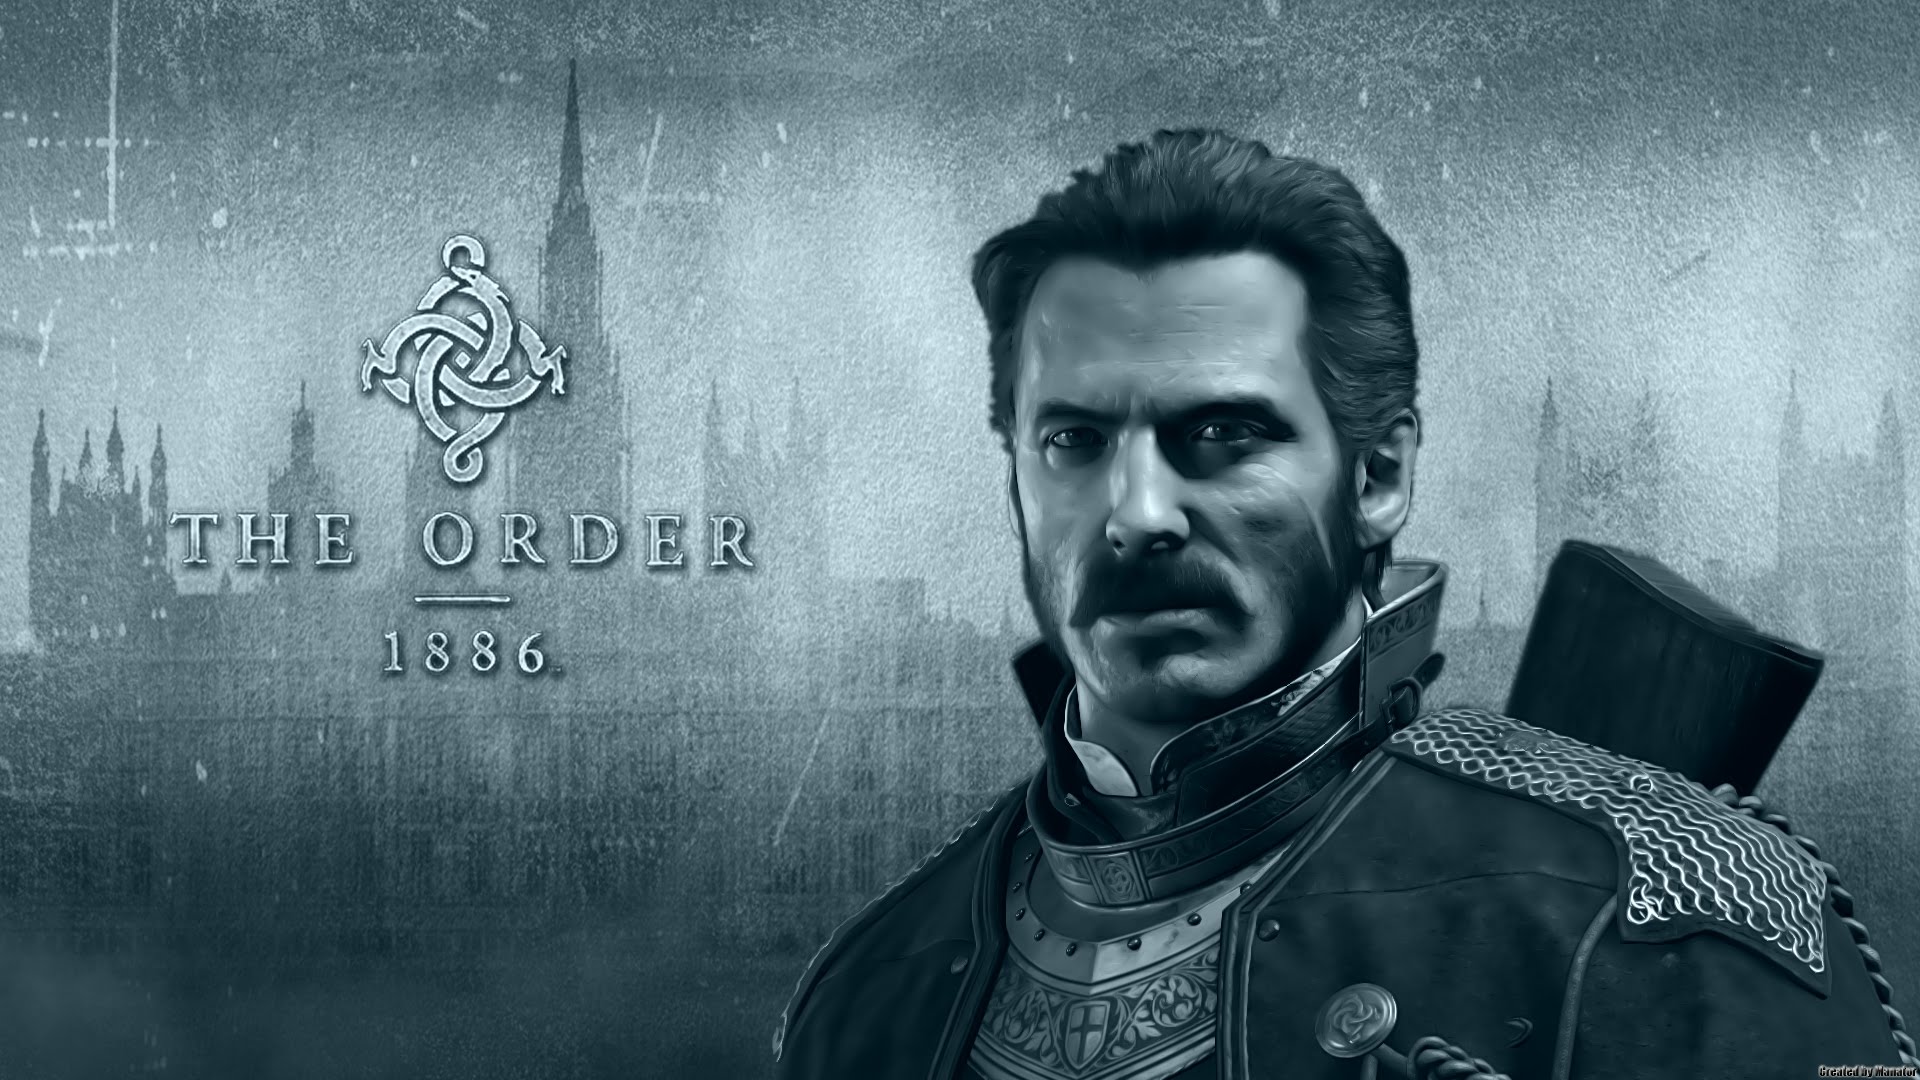 General 1920x1080 The Order: 1886 Sir Galahad video games video game characters